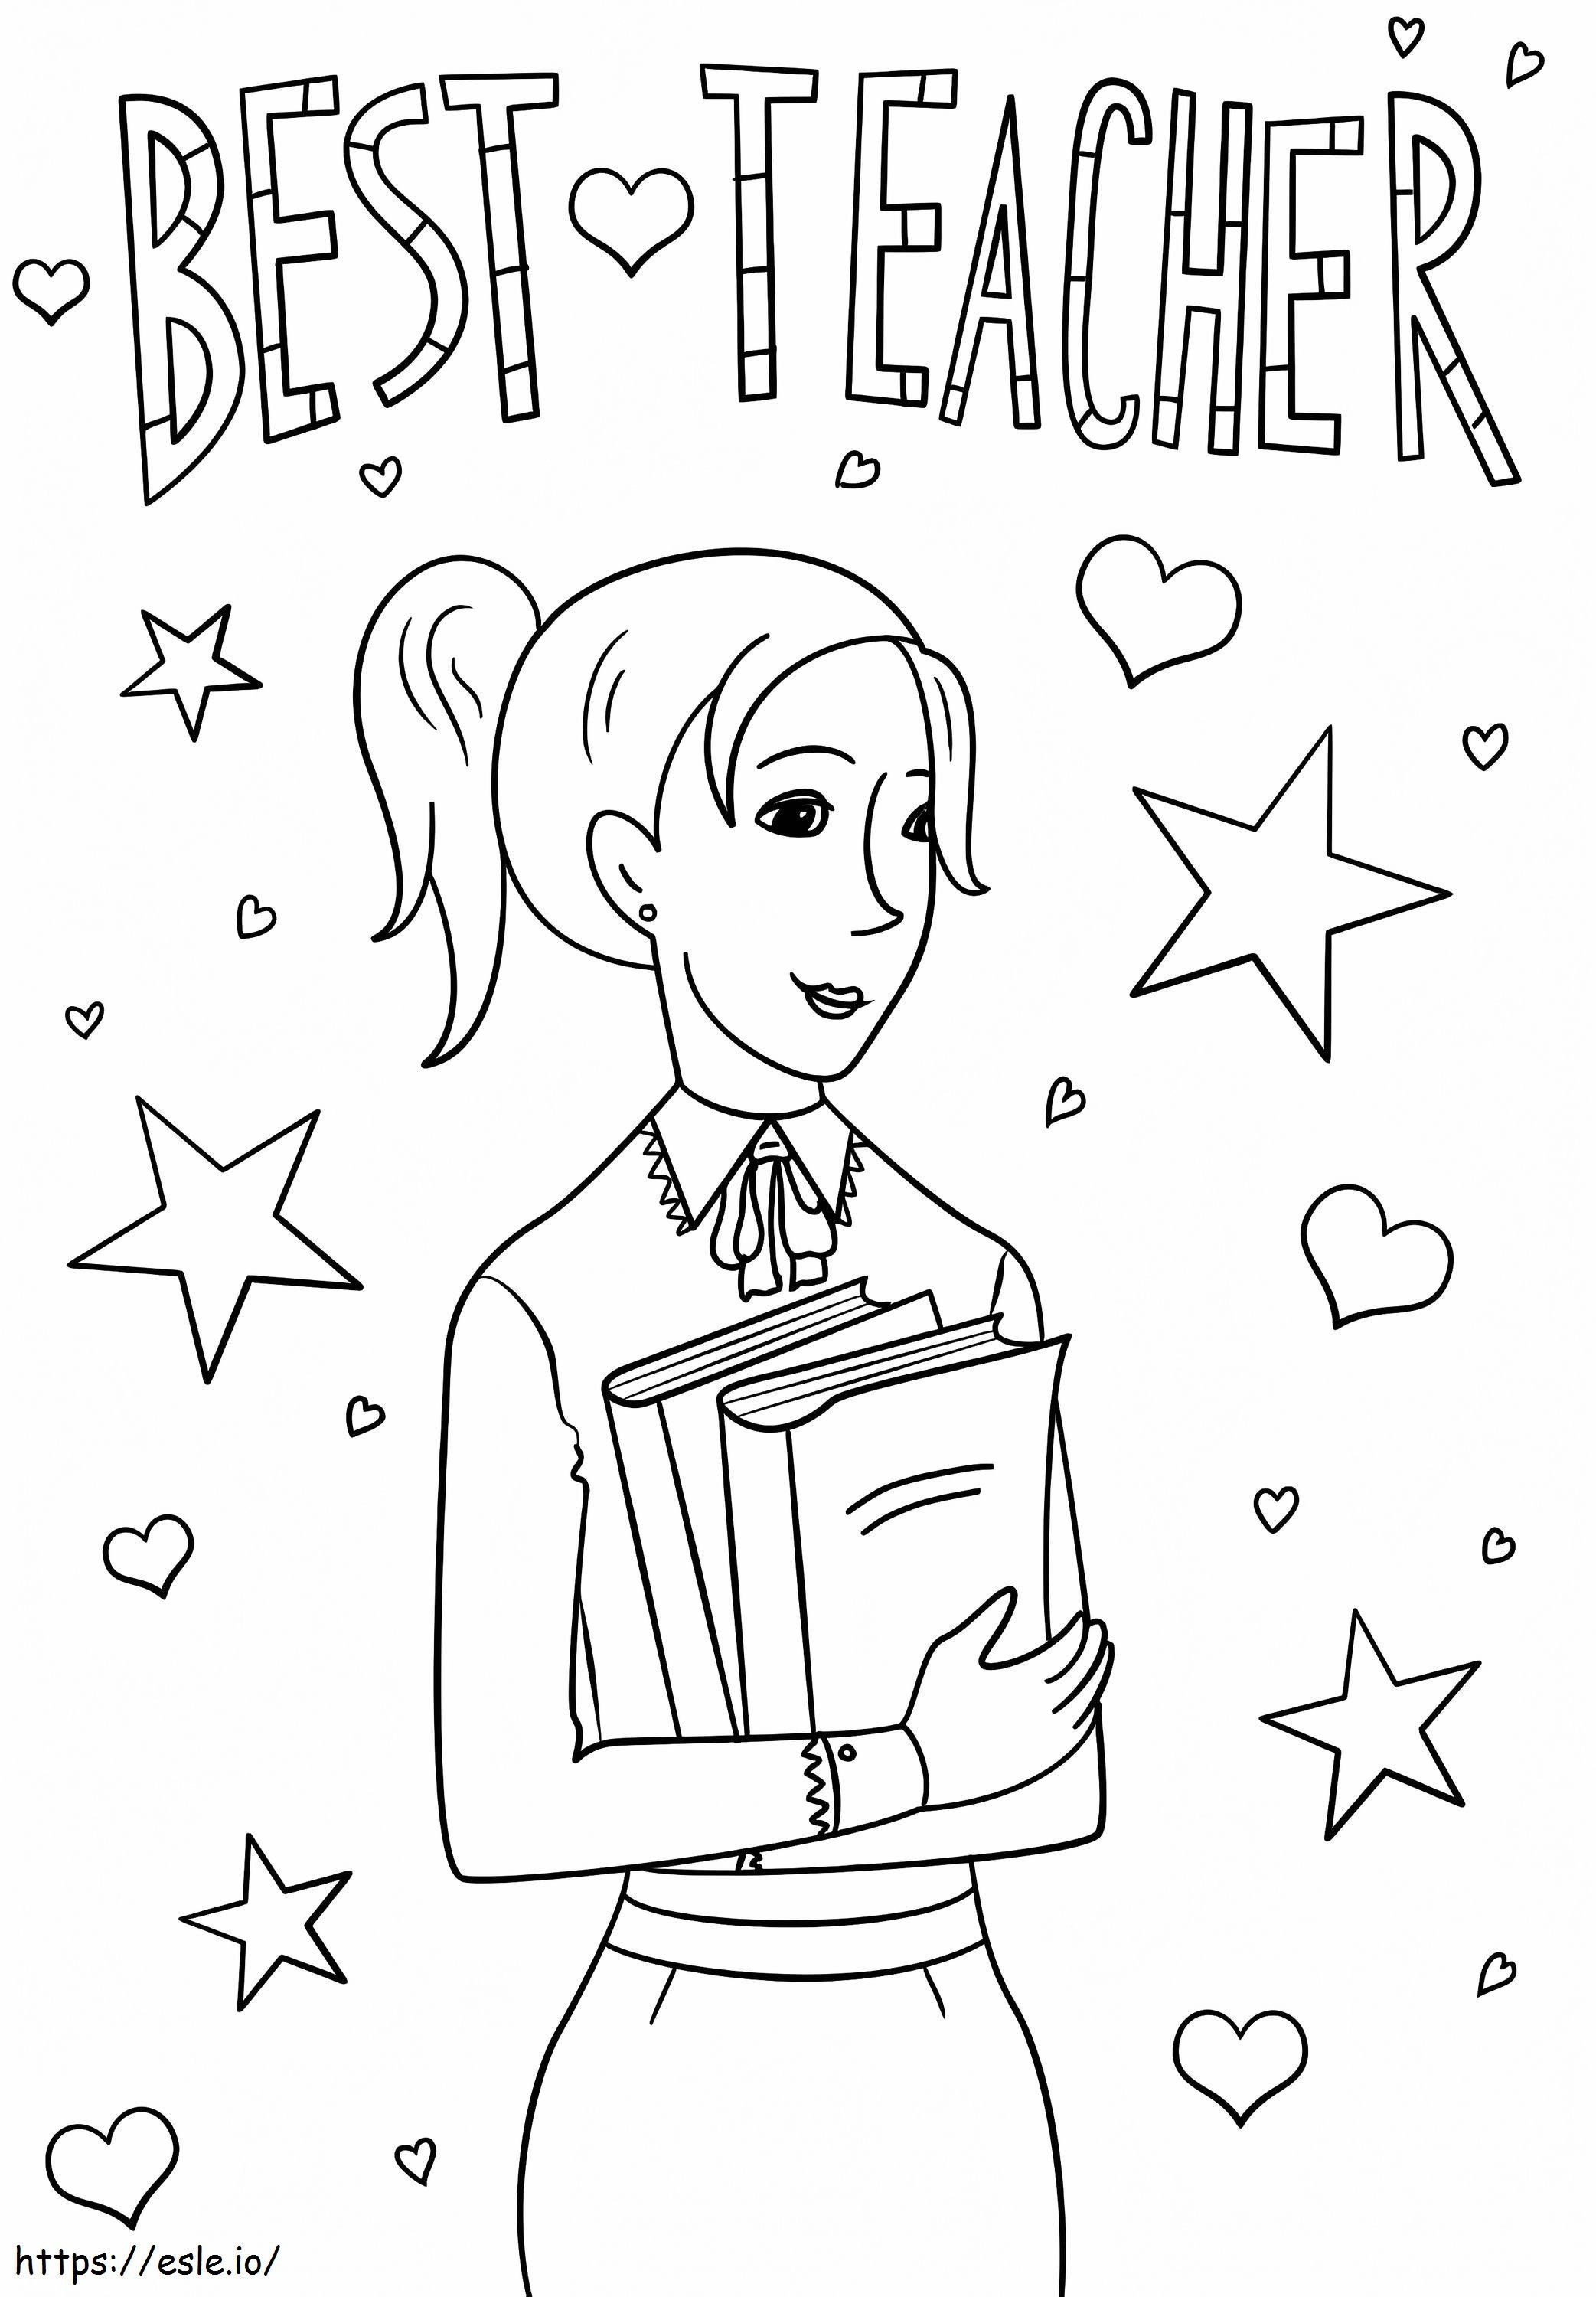 Best Teacher coloring page